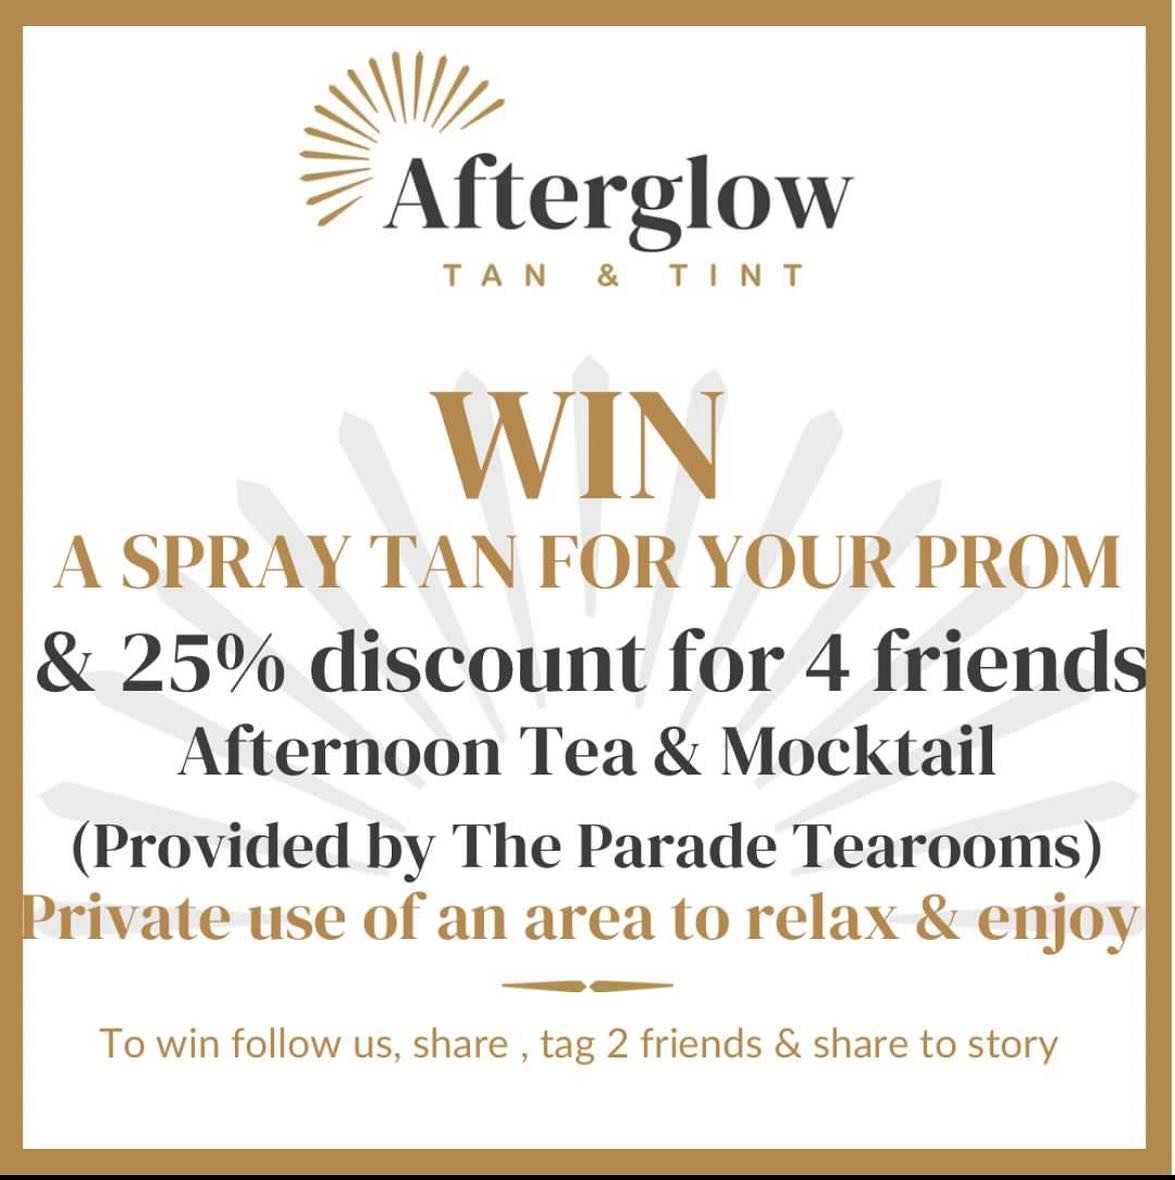 Win a spray tan package for you and your friends for prom! 

Follow us, like this post, and tag 2 friends! Share to your story for an extra entry! The more friends you tag the more chance you have a winning!!!!

If you were wanting to not wait to see